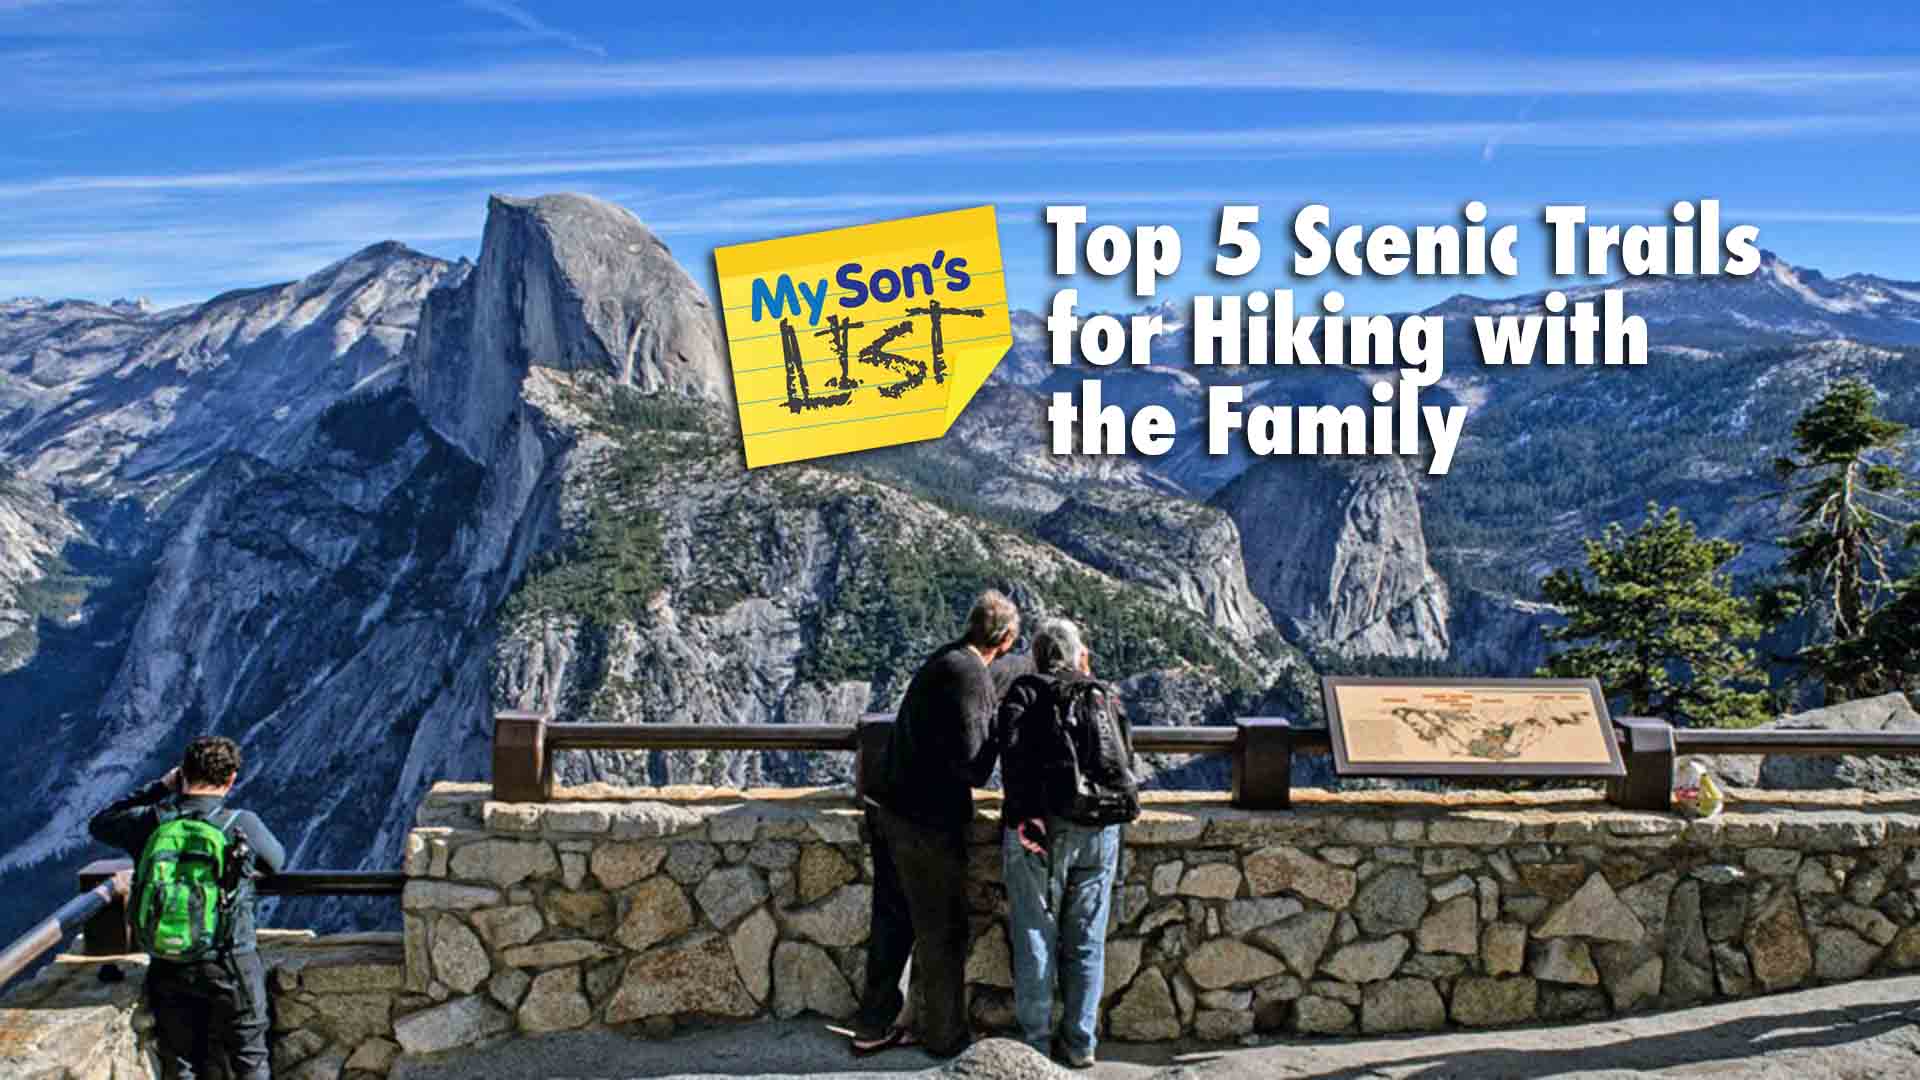 My Son's List of Top 5 Scenic Trails for Hiking with the Family